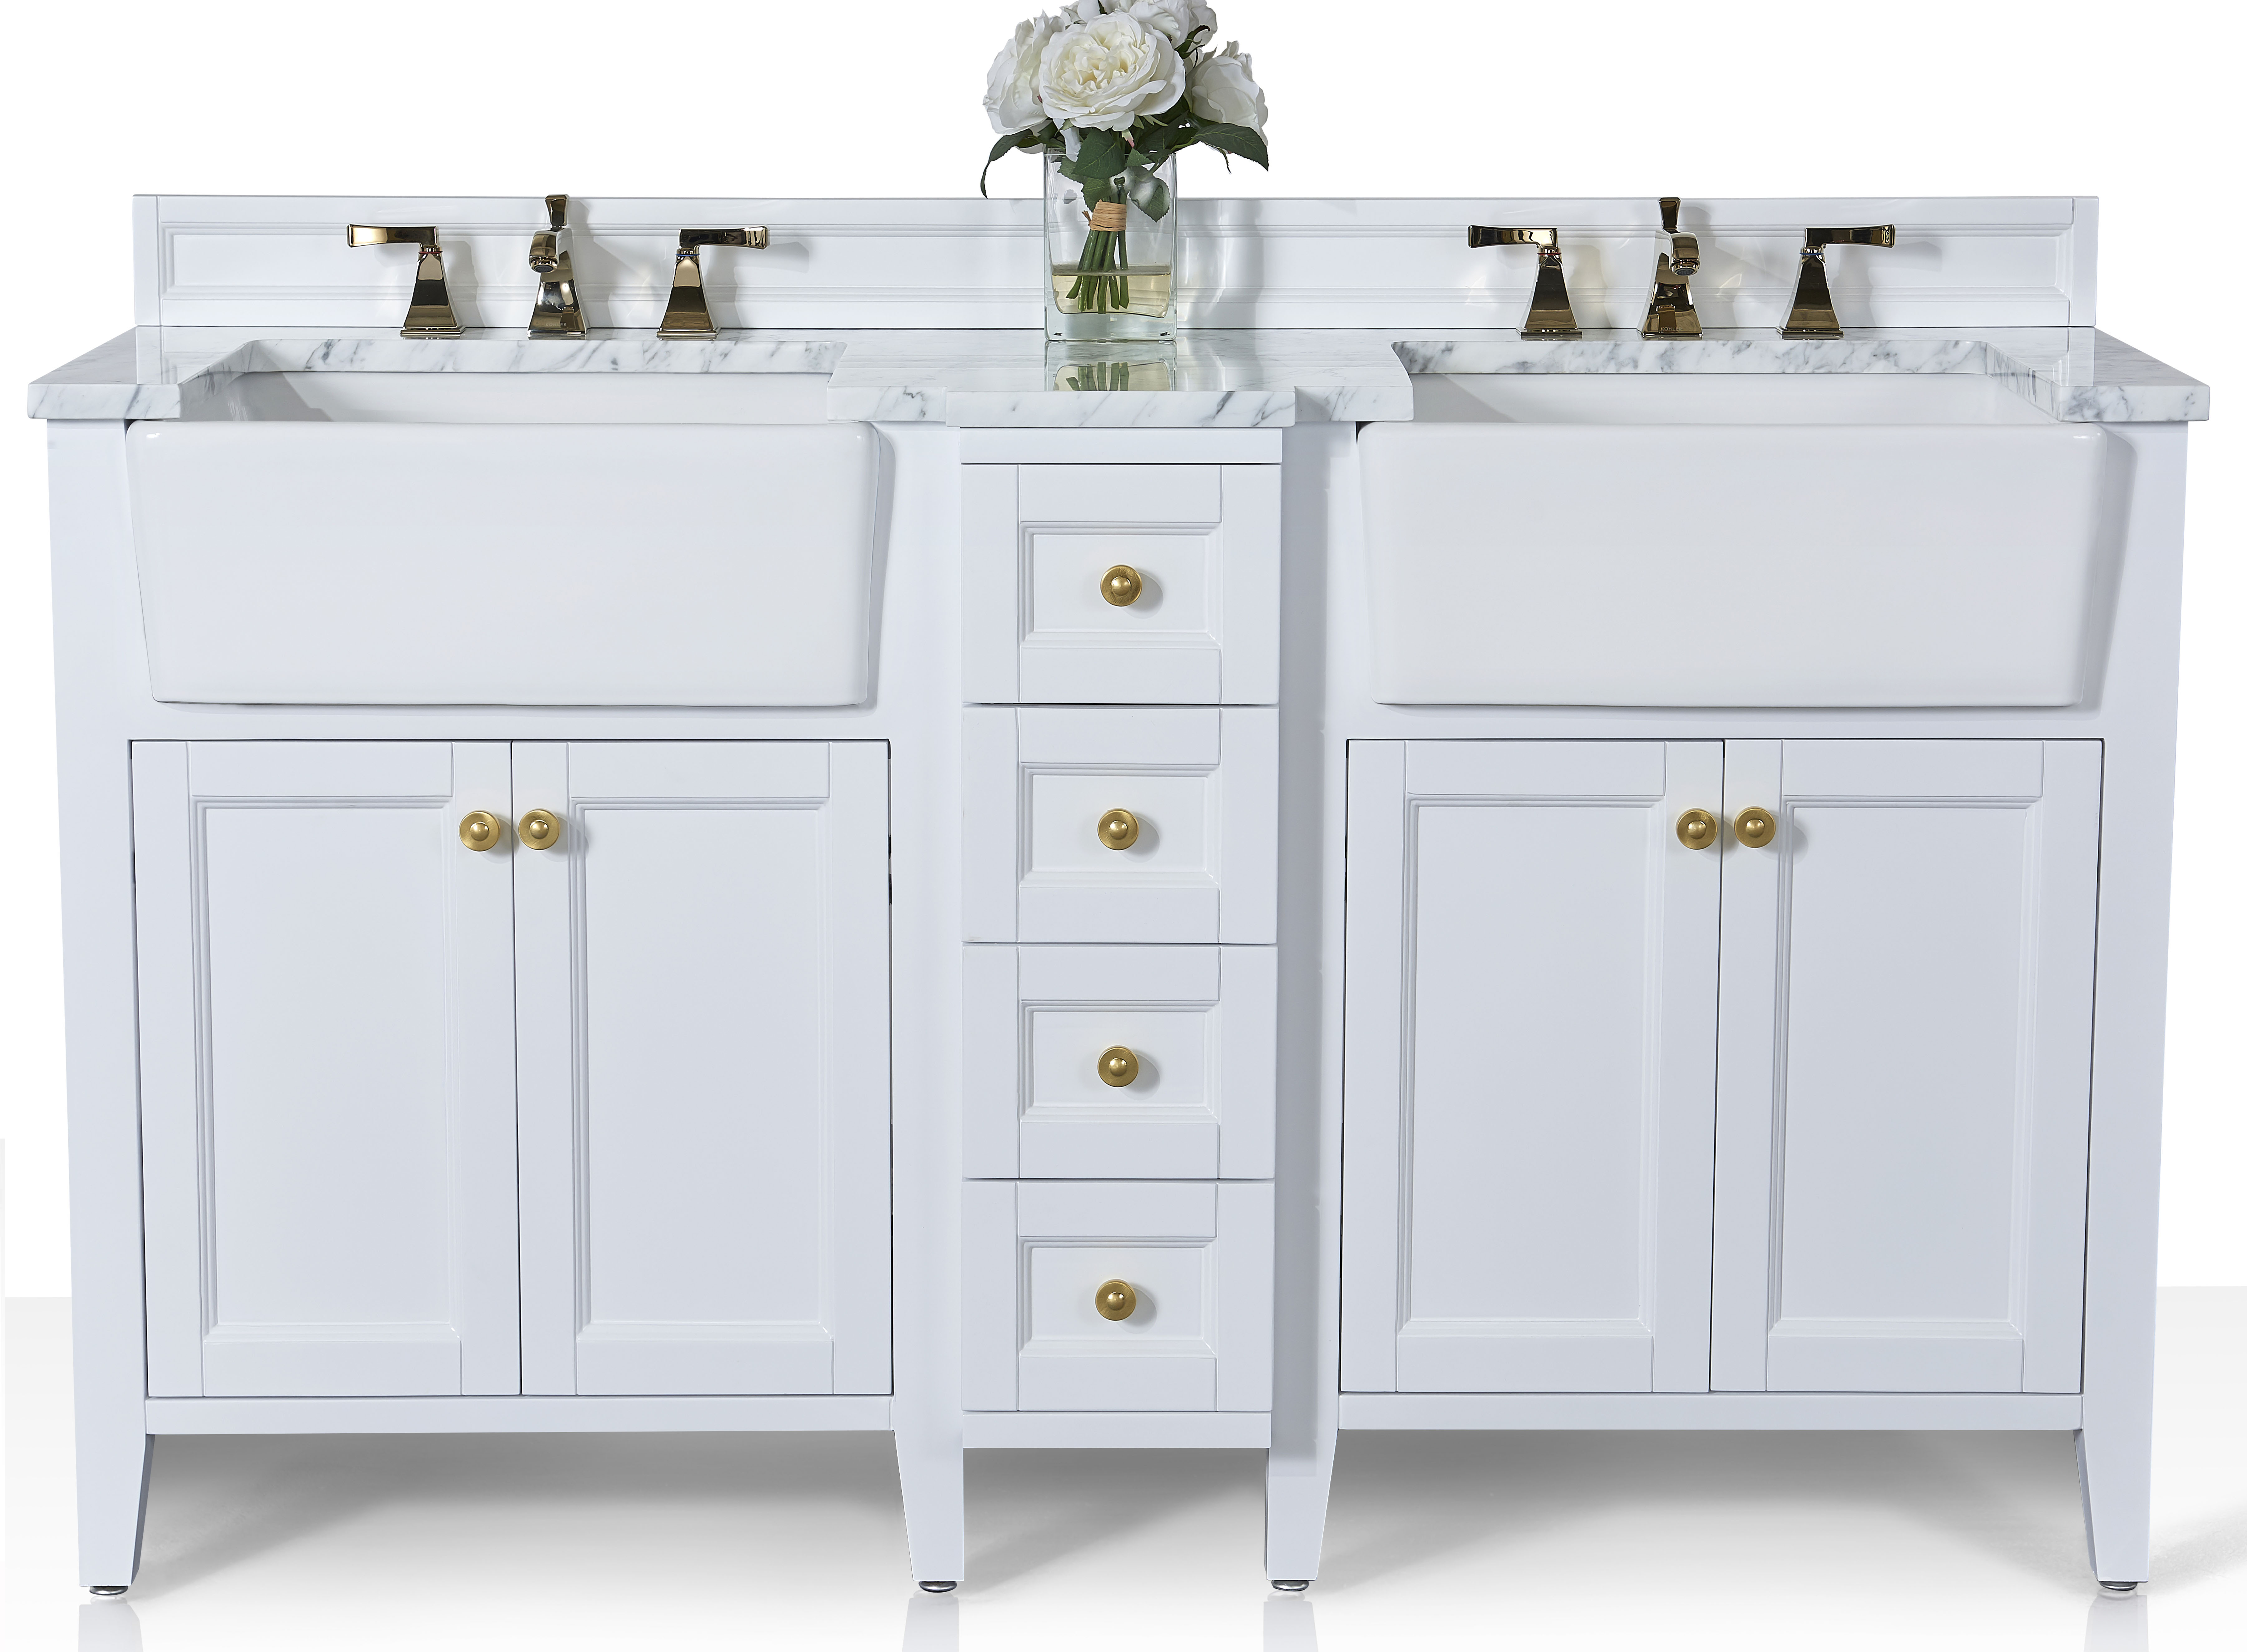 60" Bath Vanity Set in White with Italian Carrara White Marble Vanity Top and White Undermount Basin with Gold Hardware